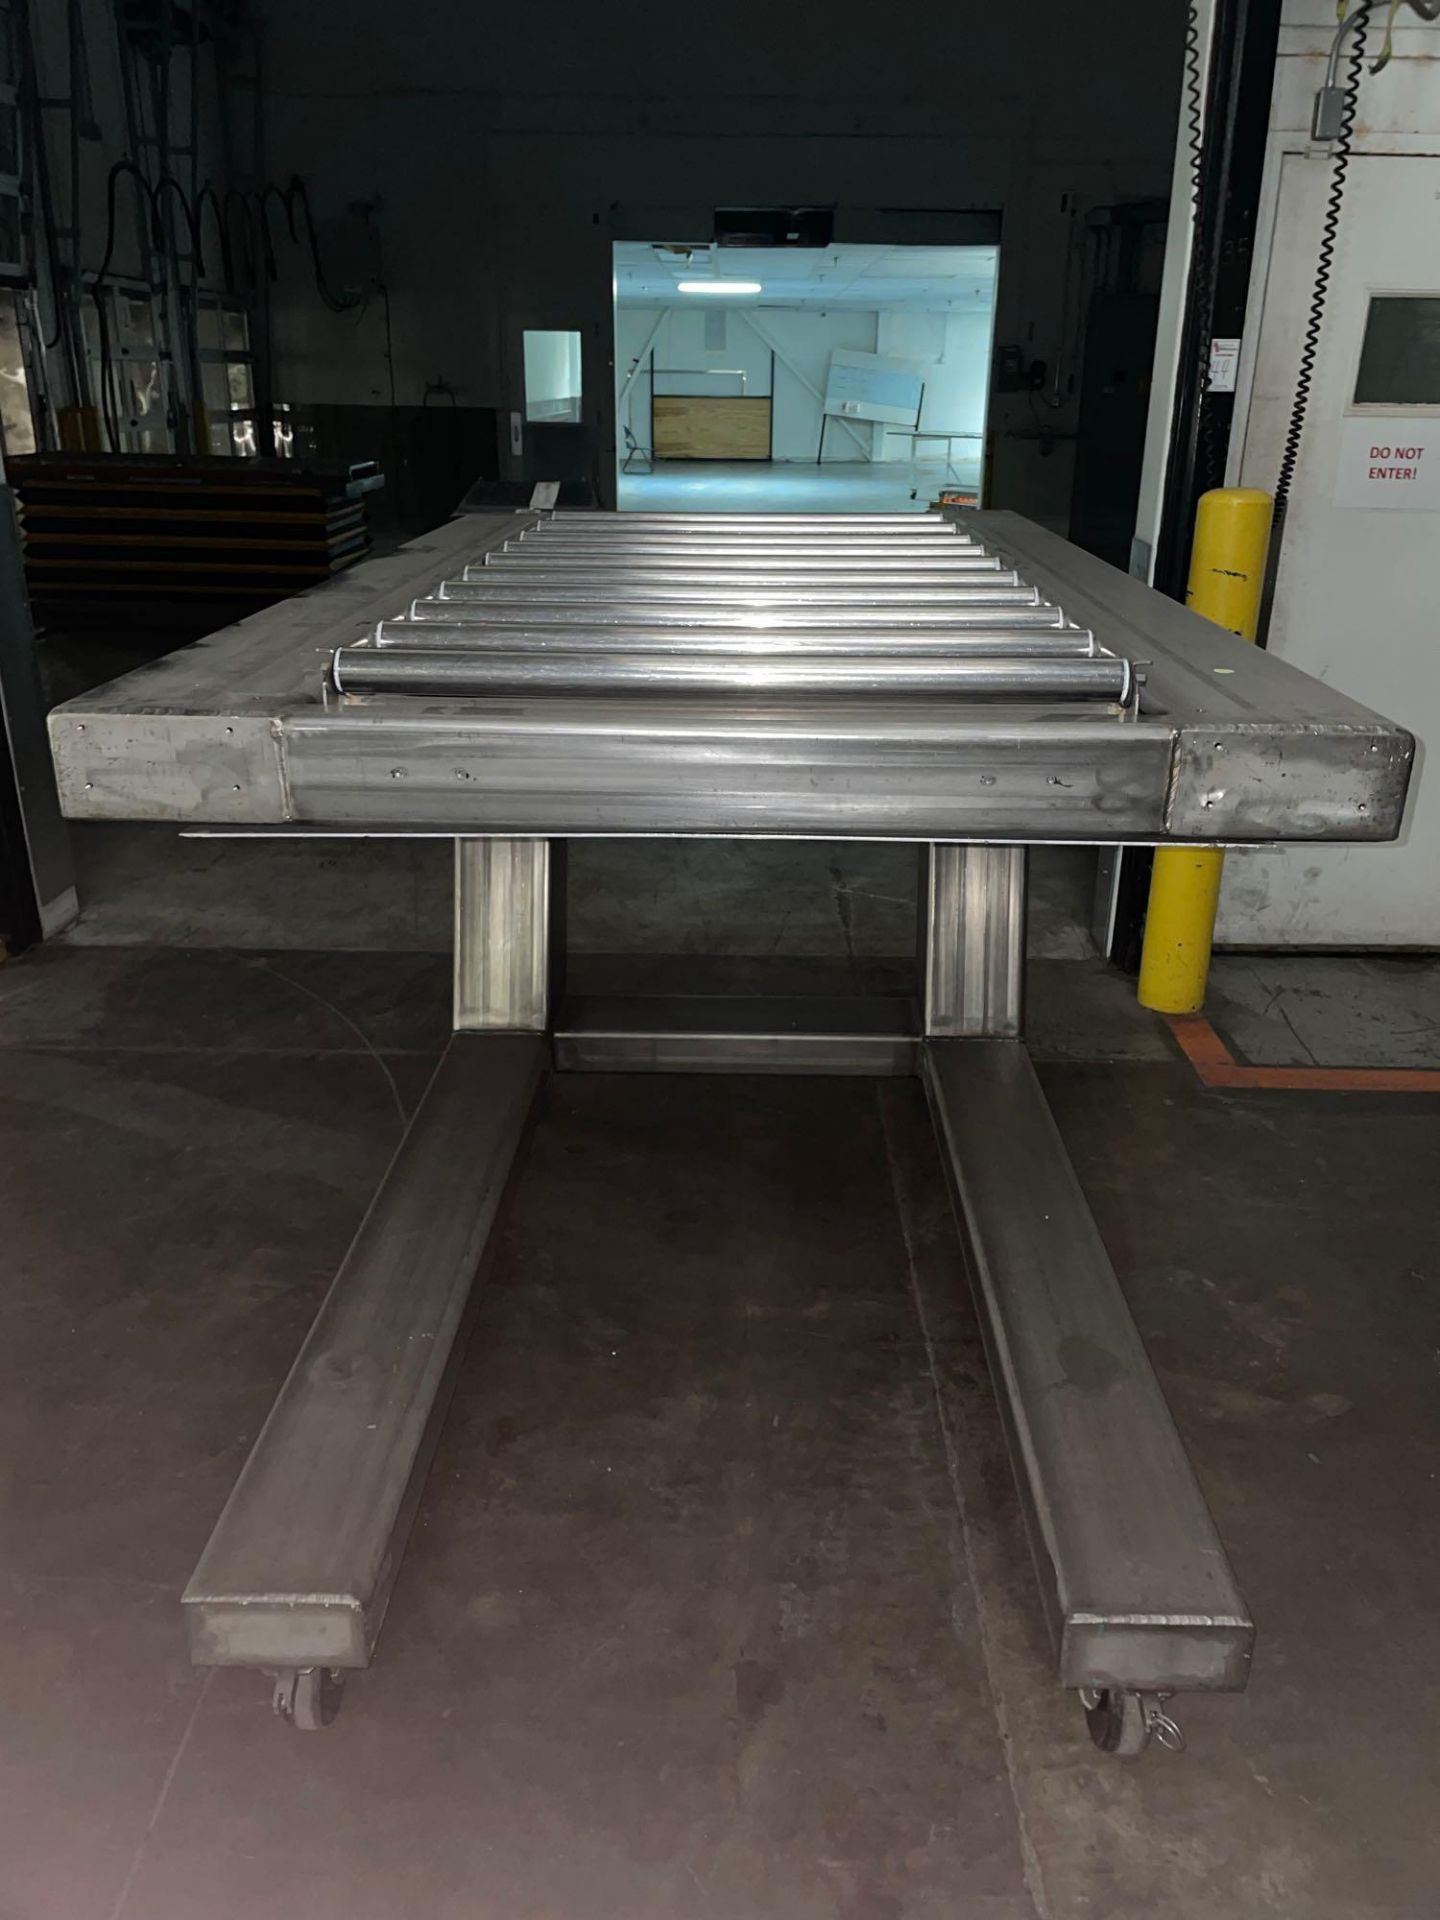 Stainless Steel Cart with Roller Conveyor Top - Image 2 of 4